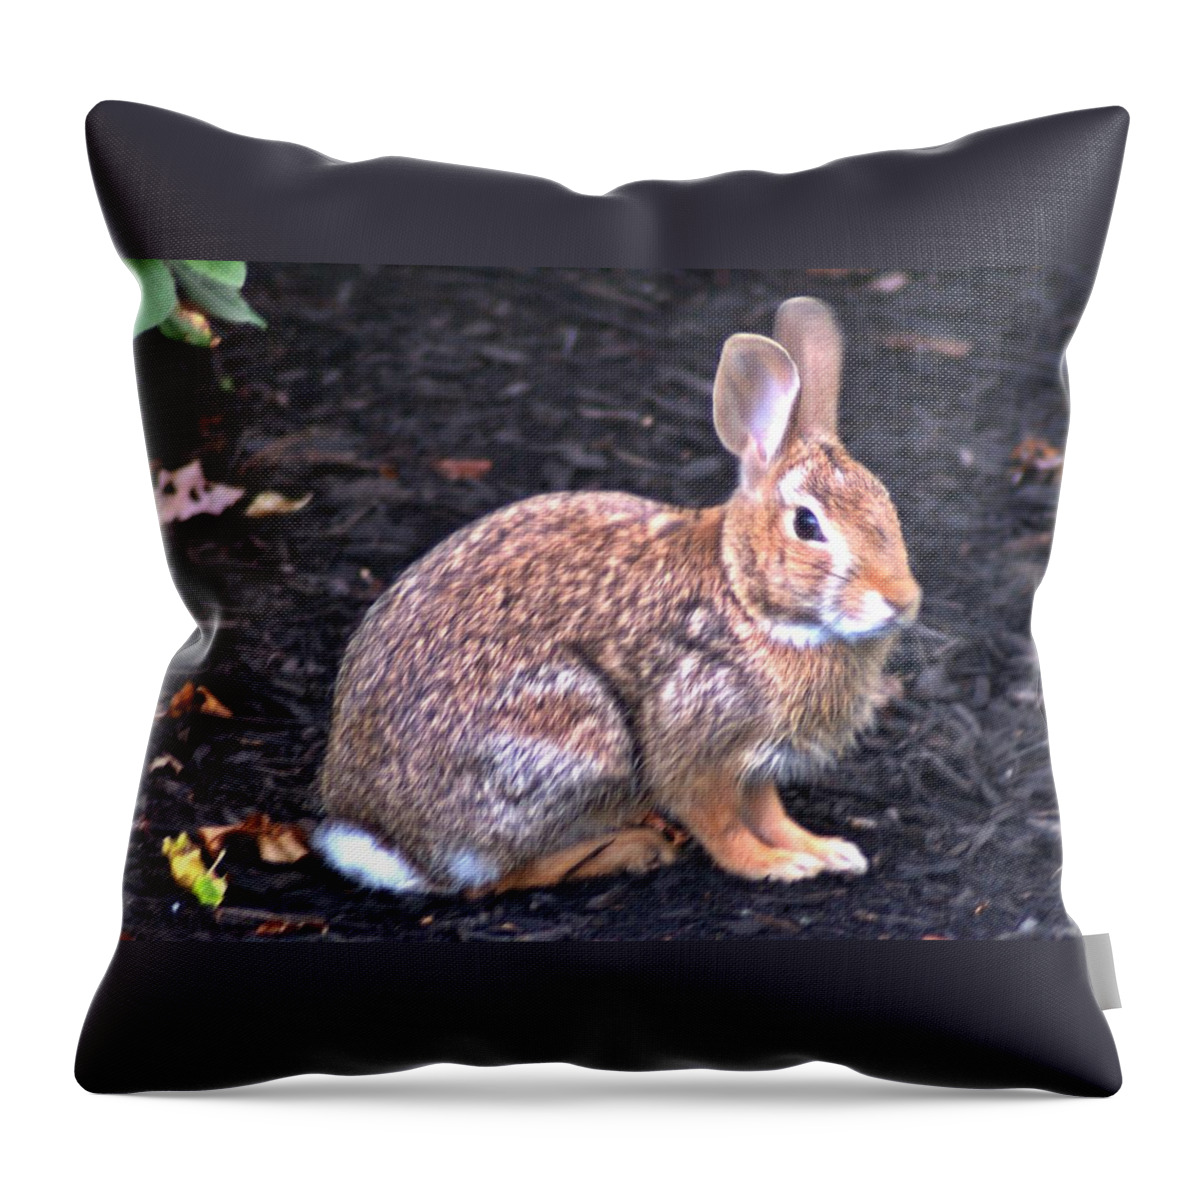 Bunny Throw Pillow featuring the photograph Wascal by Joe Faherty